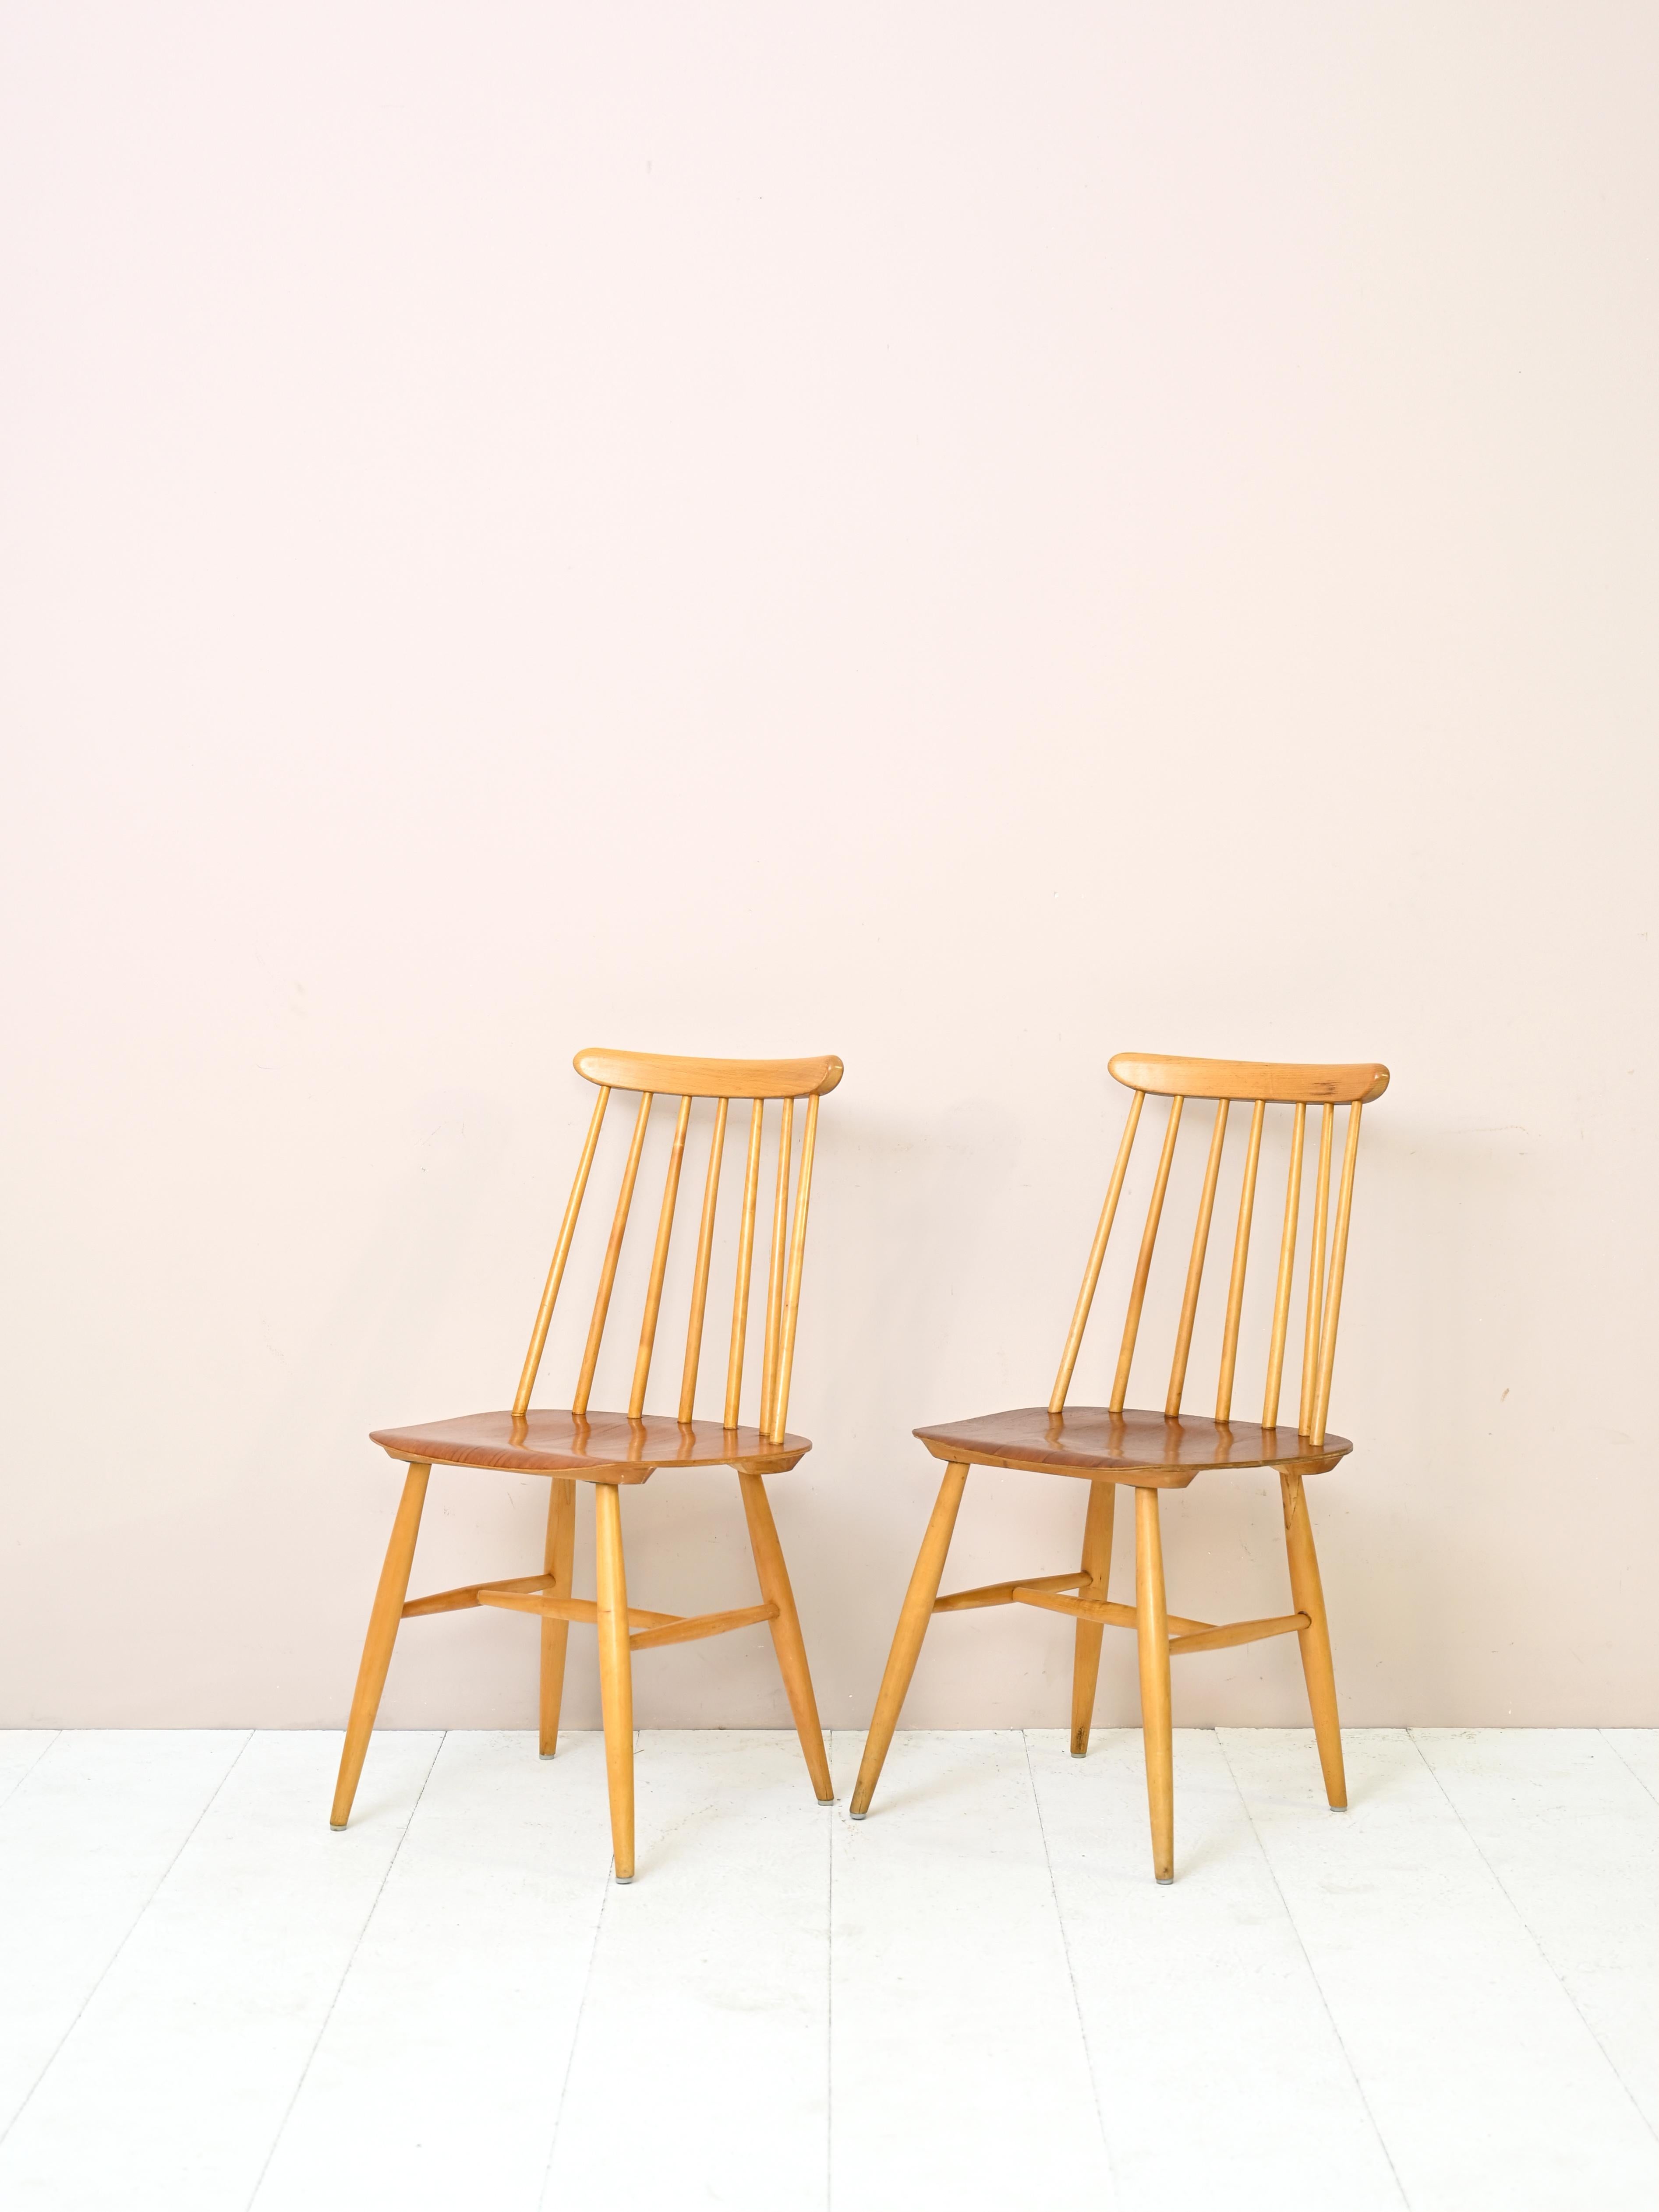 Scandinavian chairs with authenticity of originality
Pair of birch and teak chairs produced by Edsby Verken.

The birch wood frame consists of a wide seat and a backrest formed by seven
vertical spindles. The seat is made of teak.
The tapered,